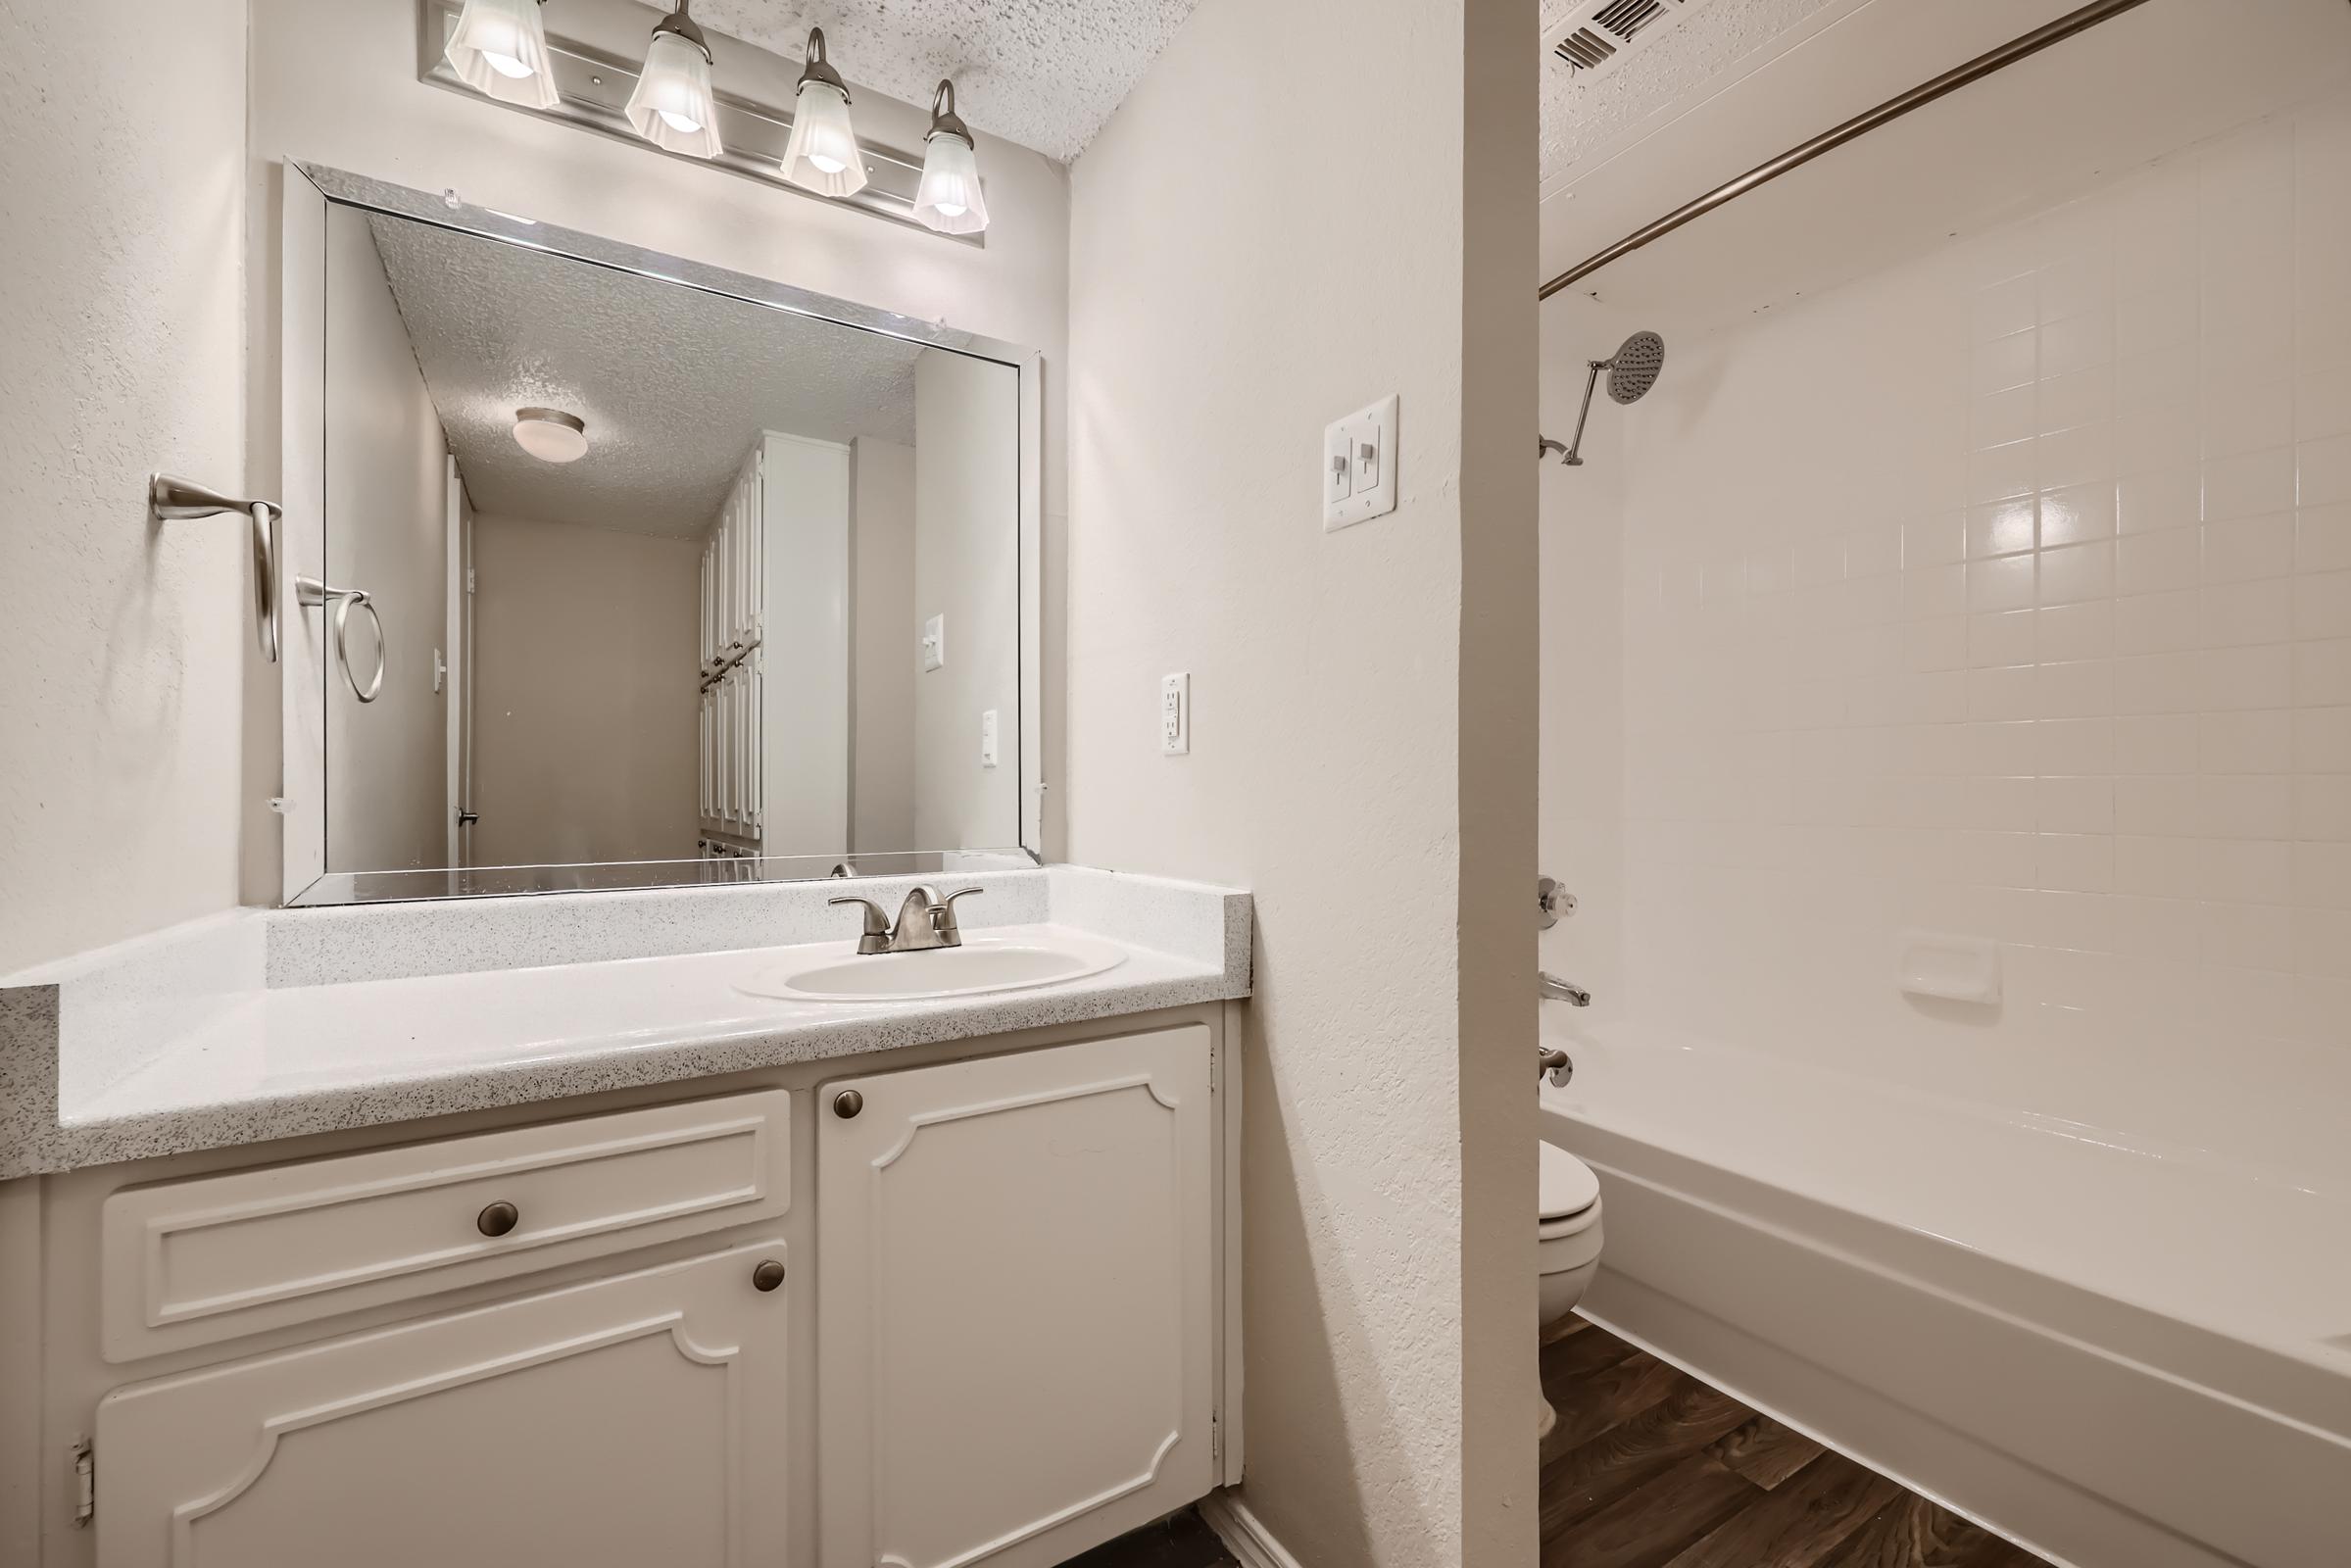 A bathroom with a separated shower and toilet at Rise Oak Creek.